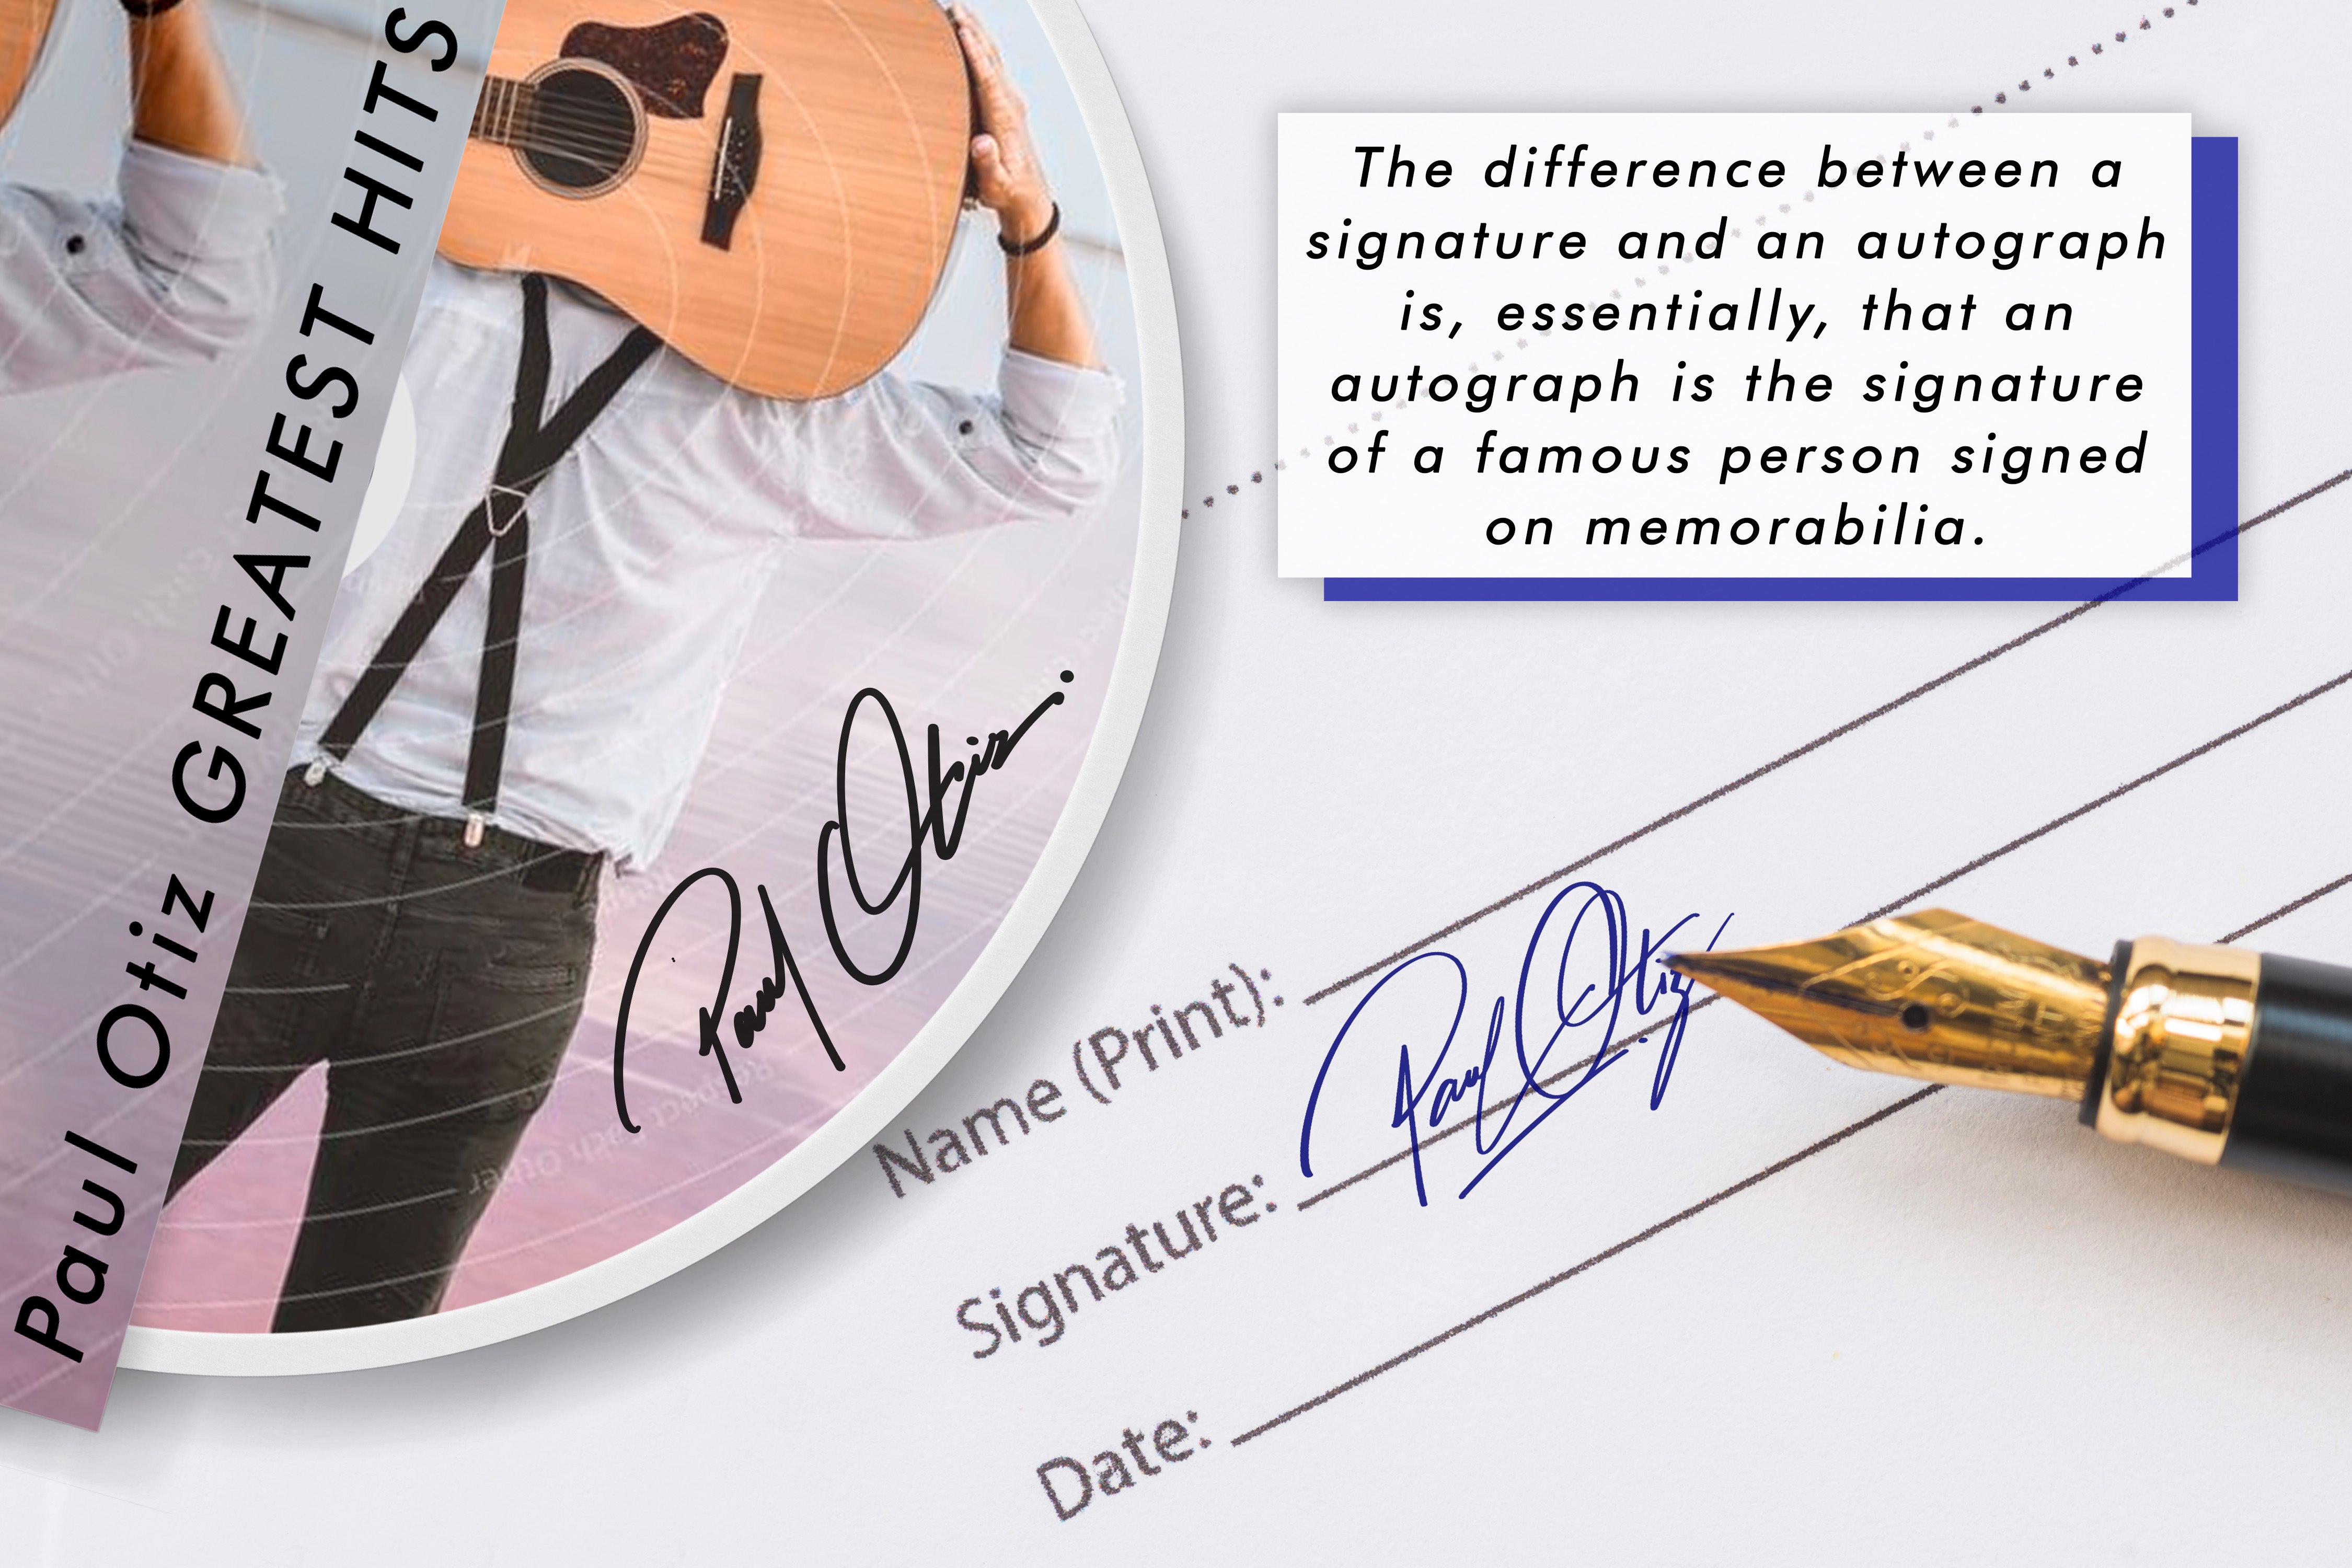 The difference between a signature and an autograph is, essentially, that an autograph is the signature of a famous person signed on memorabilia.